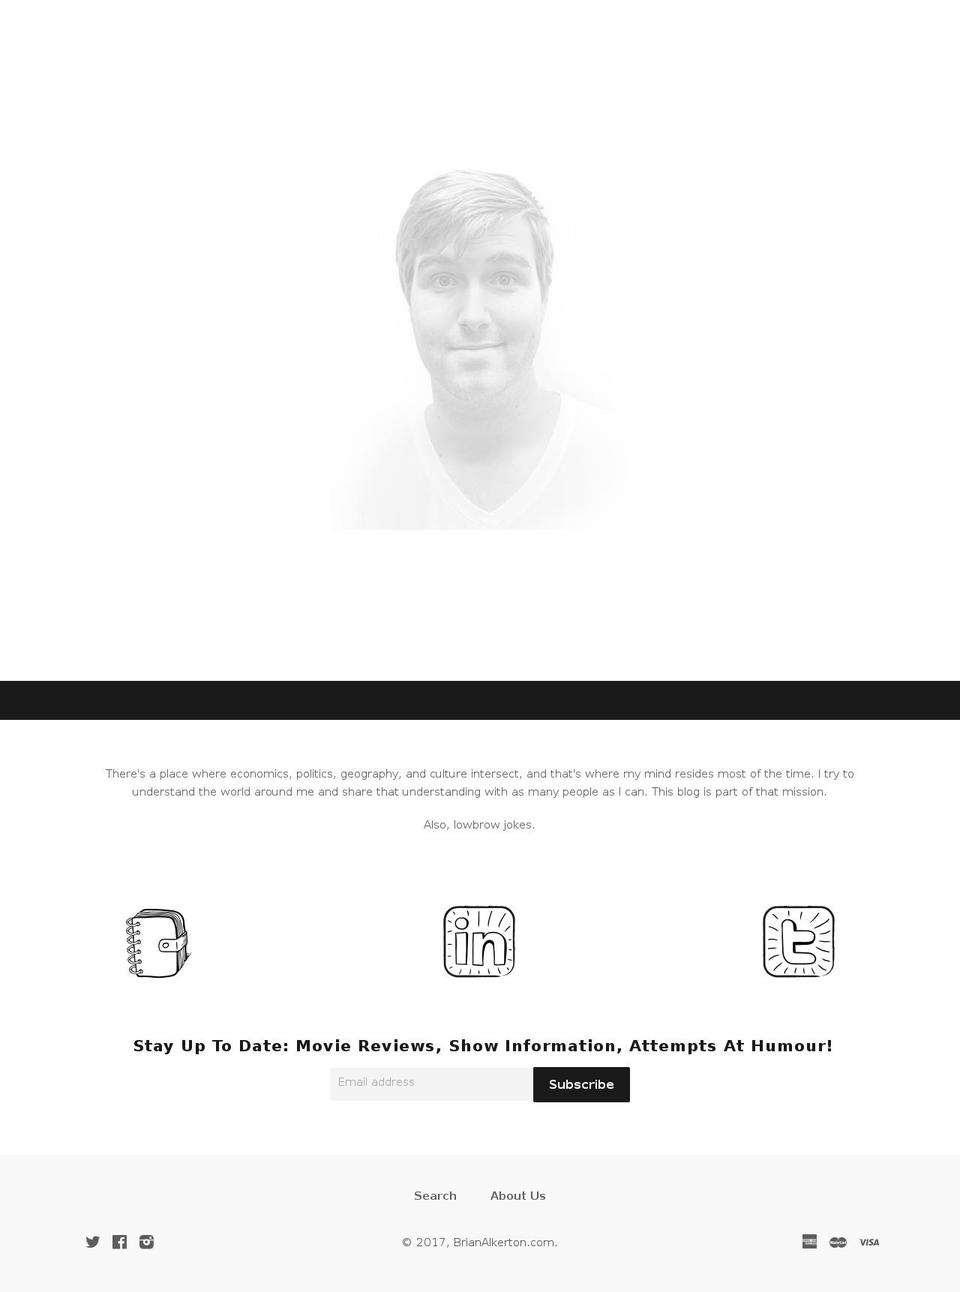 Express Shopify theme site example brianalkerton.com